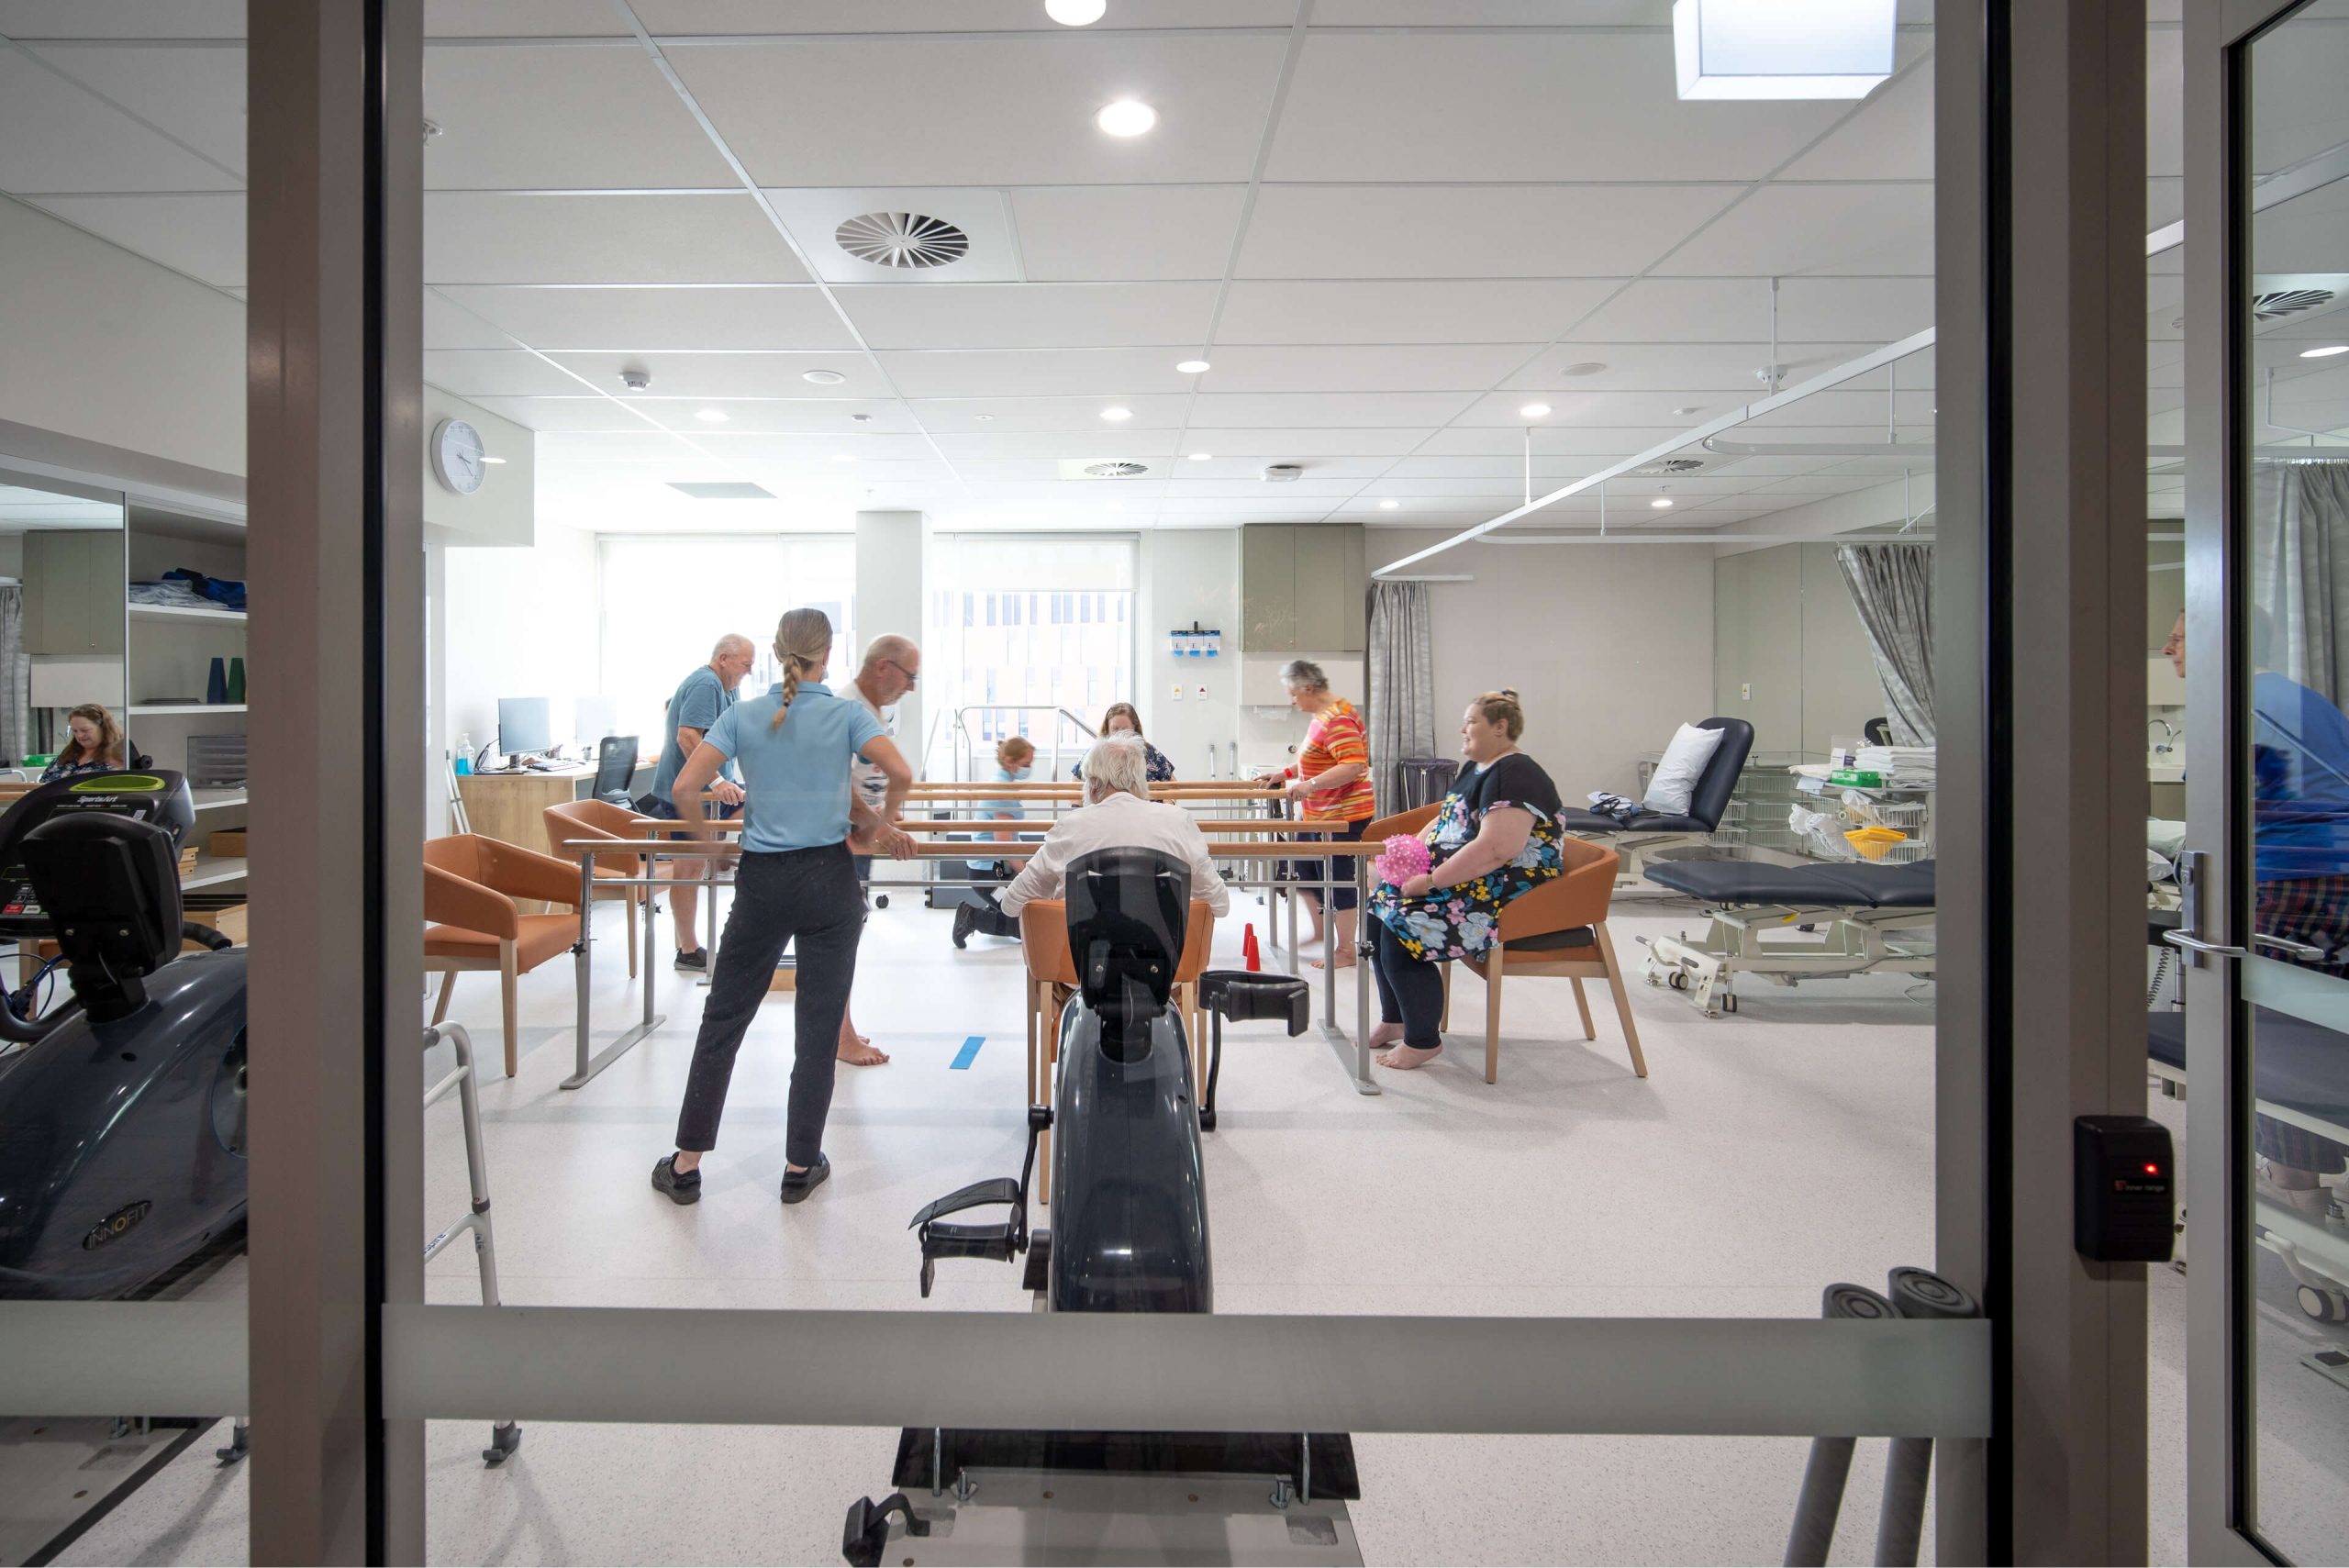 006 physiotherapists and patients in exercise therapy room with equipment and beds matilda nepean private hospital taylor